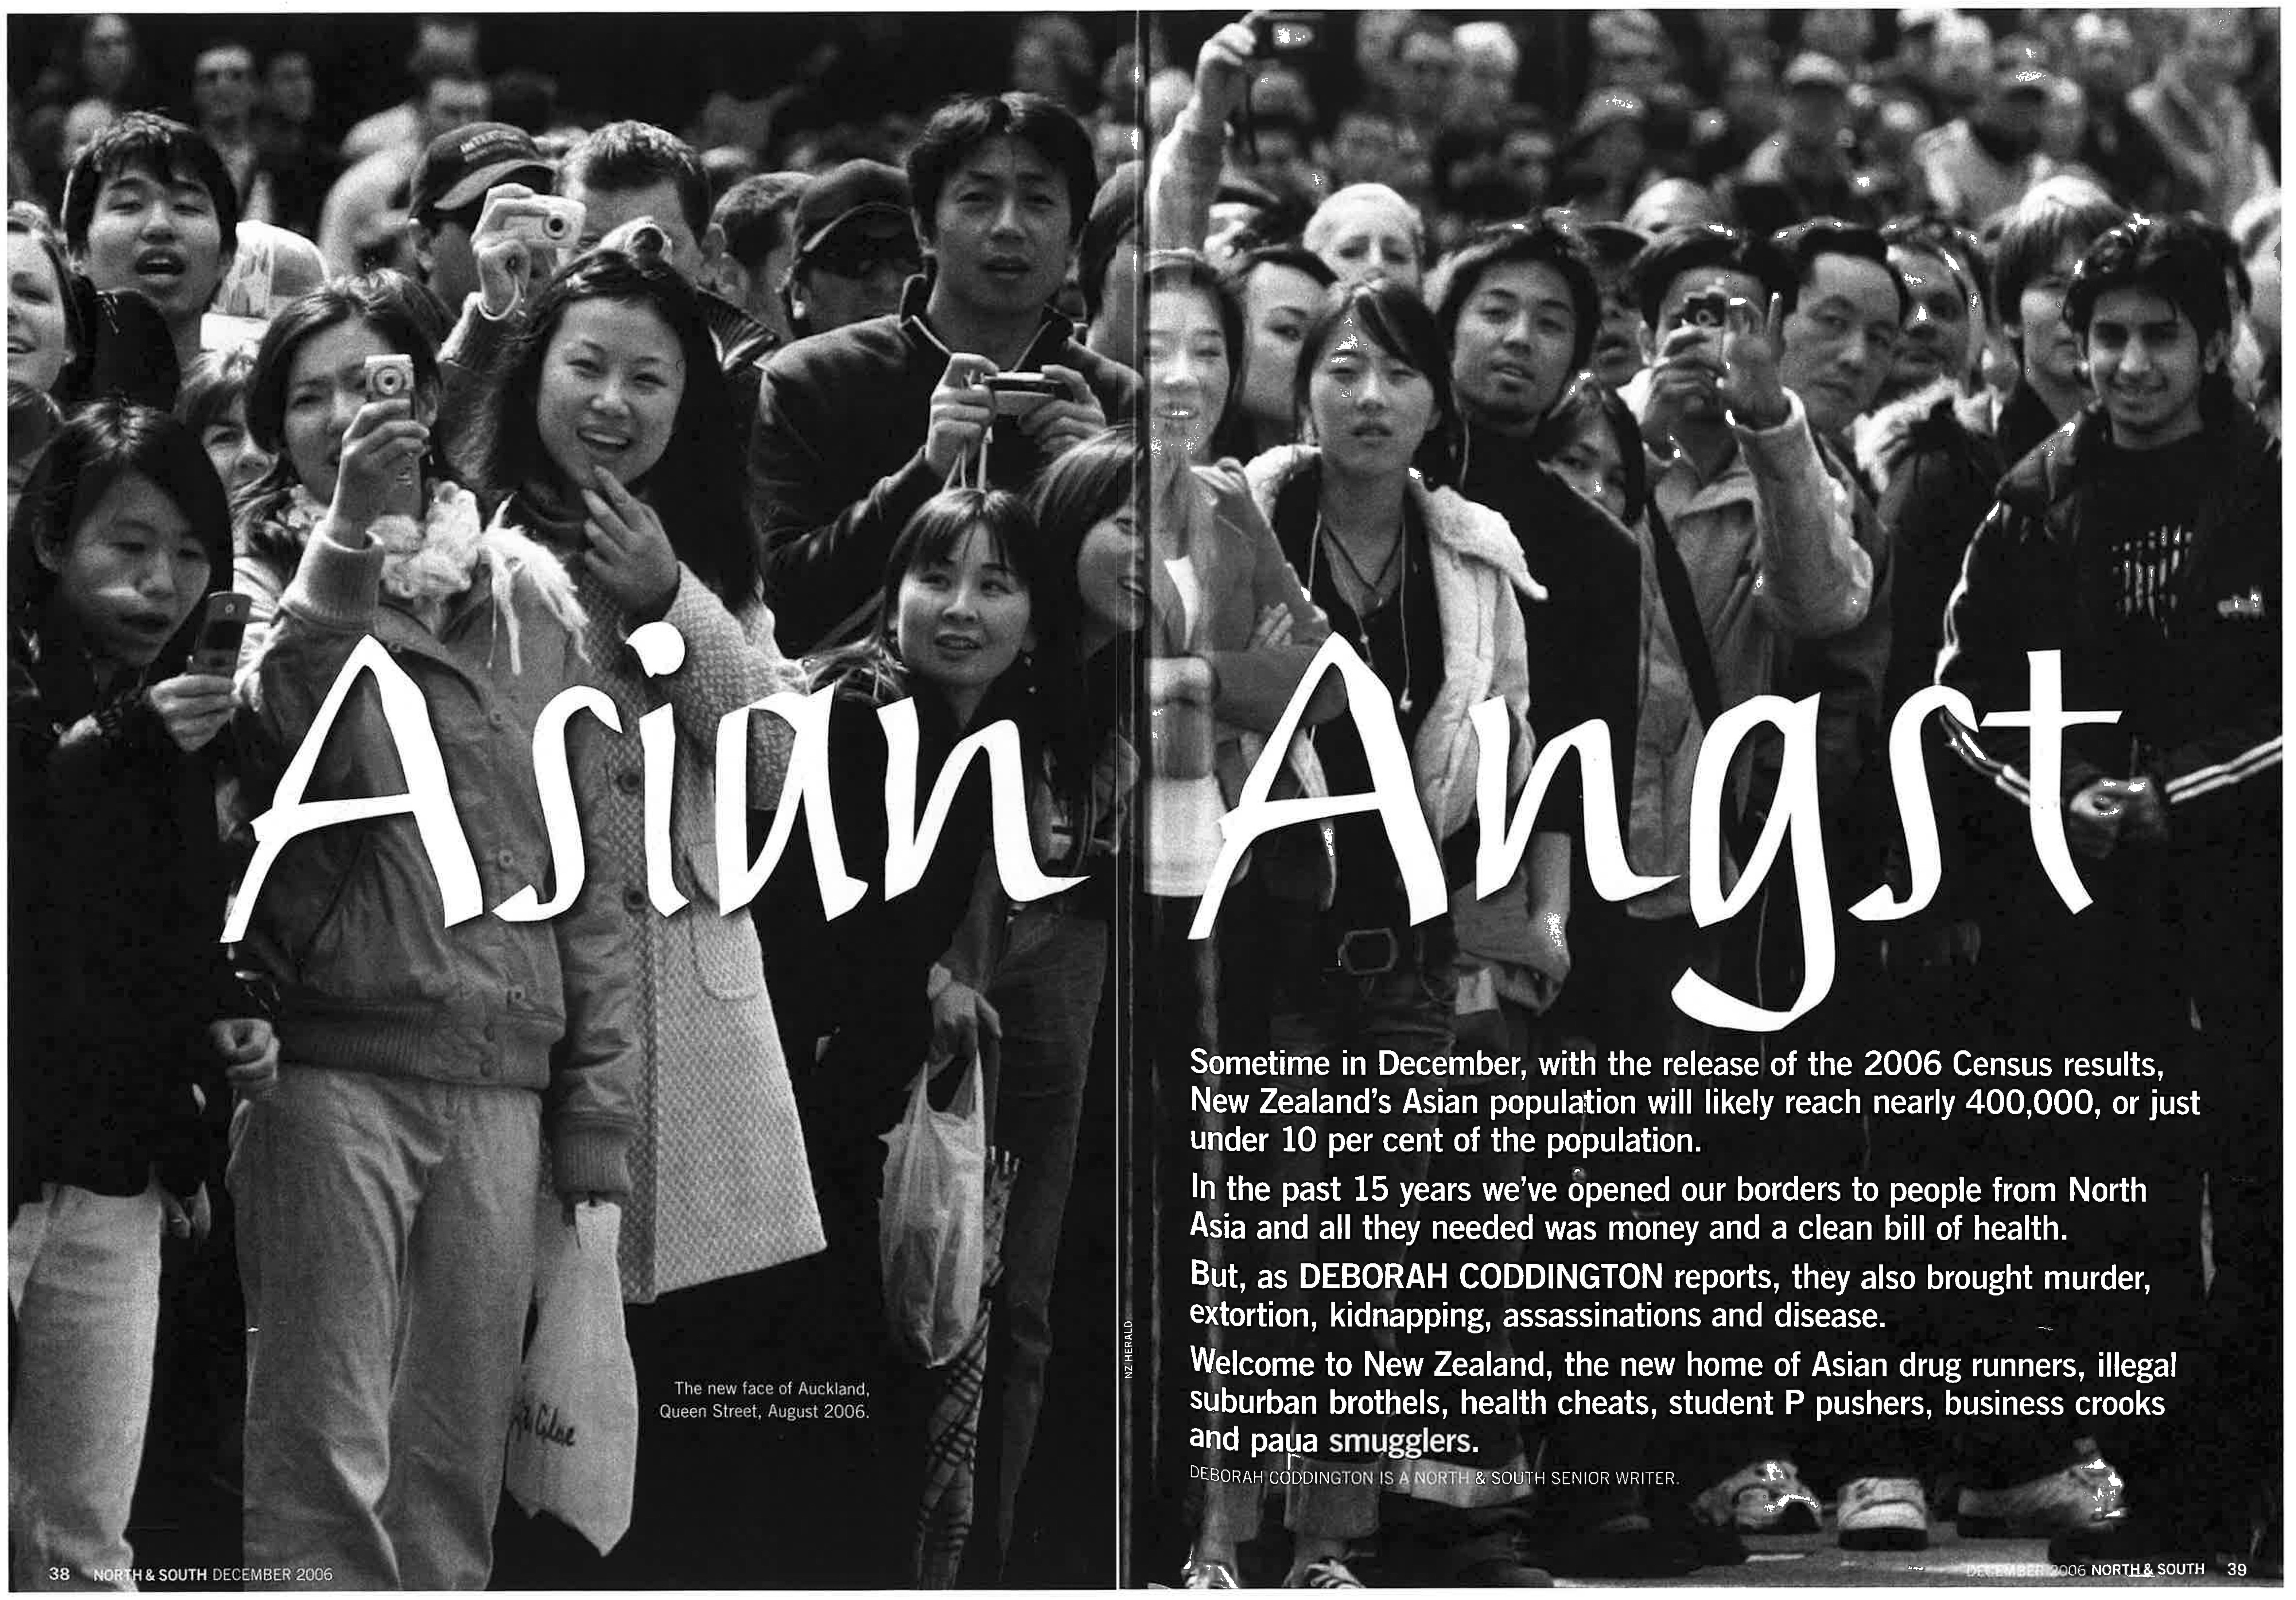 'Asian Angst' heading on a photo of a crowd of Asian people holding up cameras.